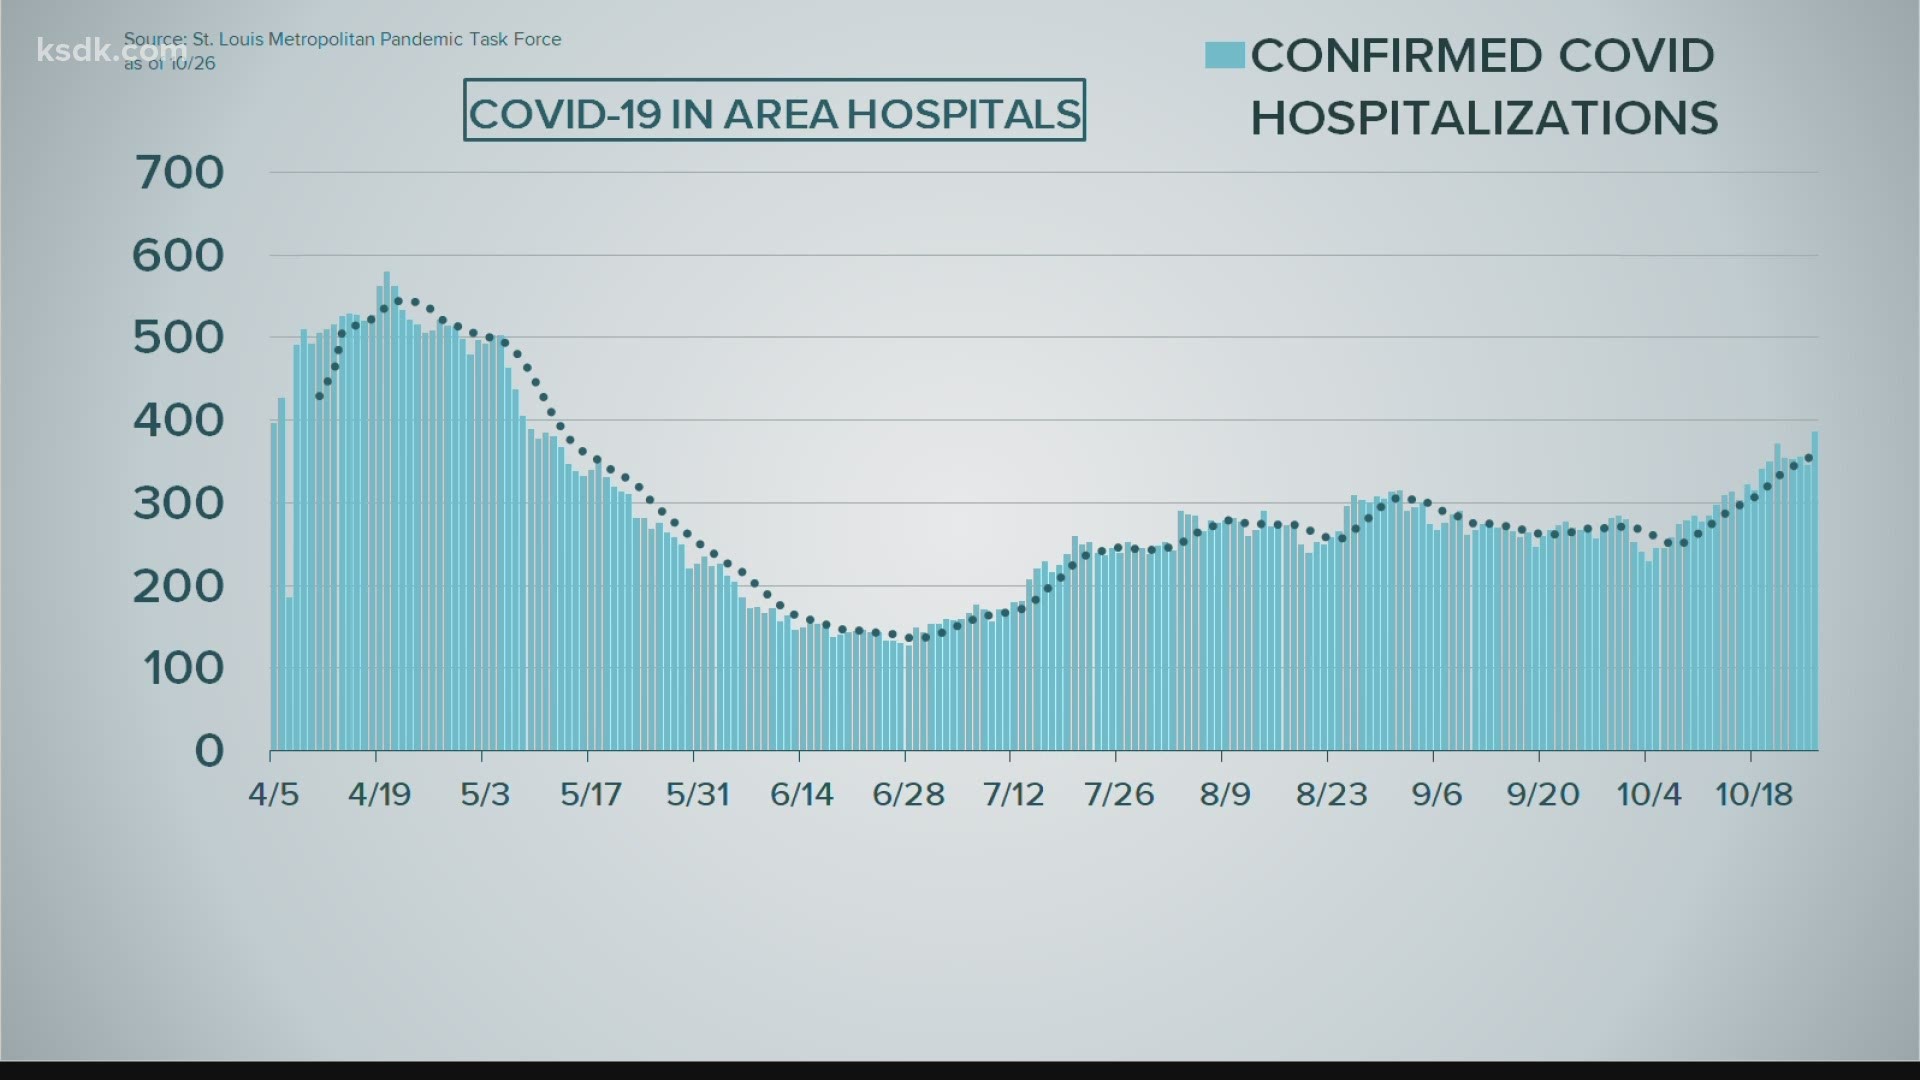 This is the greatest number of COVID-19 patients in area hospitals since early May